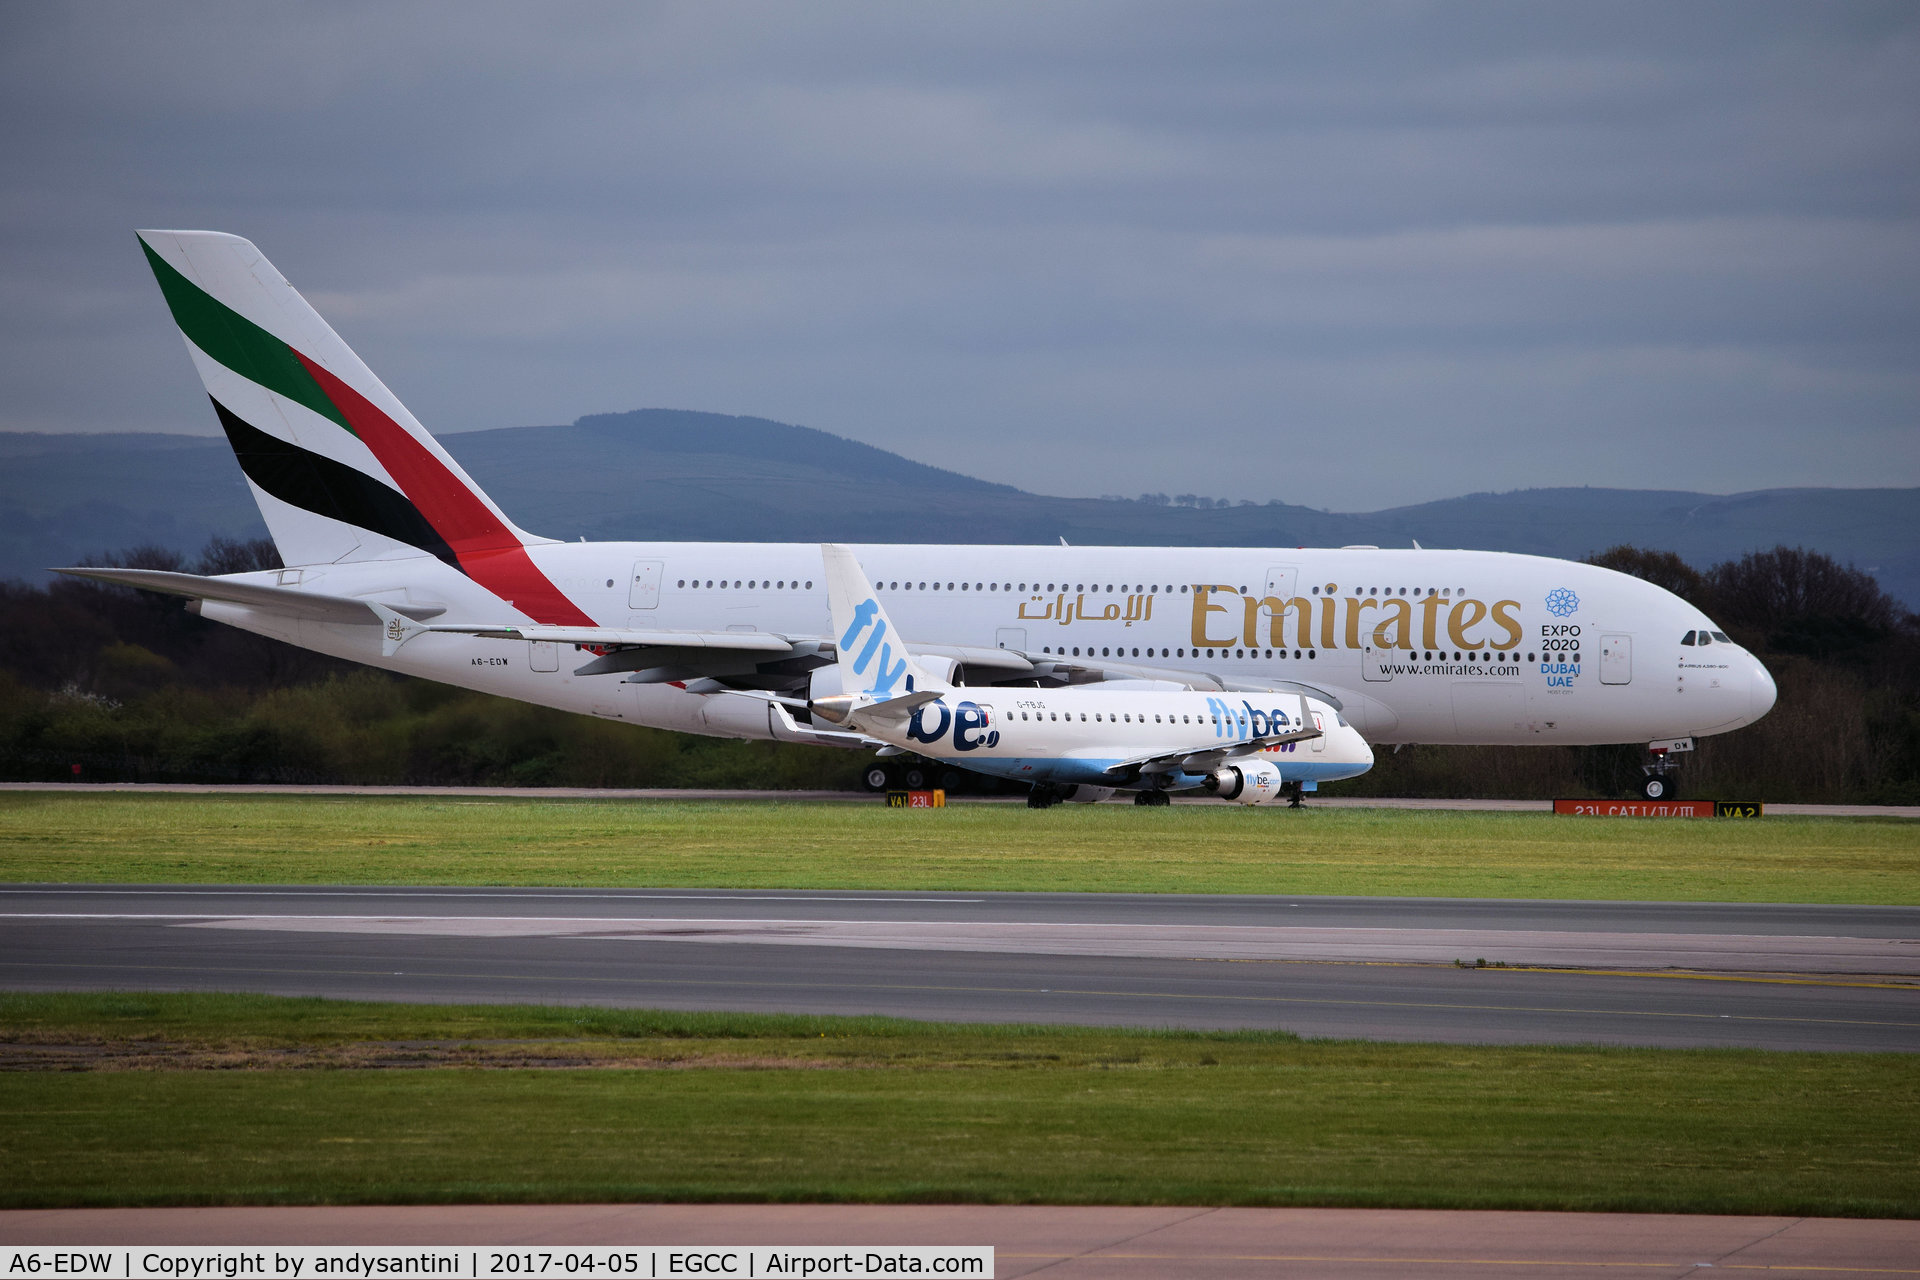 A6-EDW, 2012 Airbus A380-861 C/N 103, holding for takeoff 23L man egcc uk  at the side in the same shot [G-FBJG EMB175 BEE old col's waiting to line up on 23L